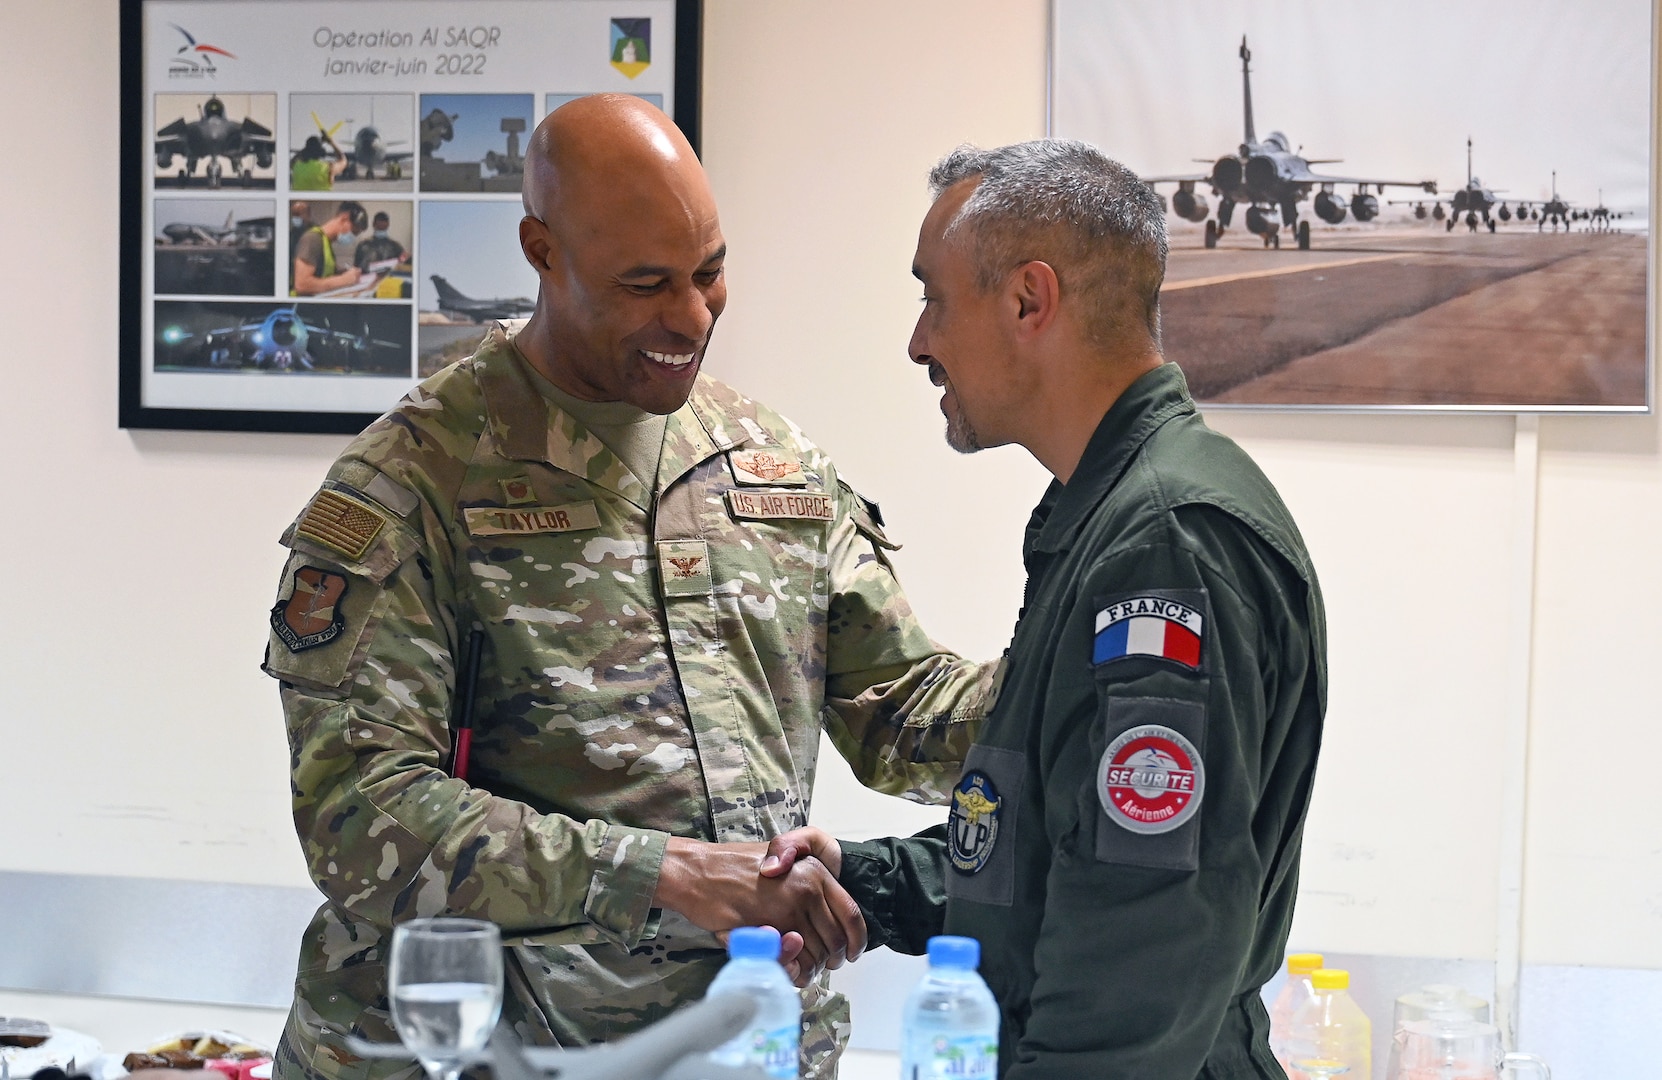 U.S. Air Force Col. Terence G. Taylor, left, 380th Air Expeditionary Wing commander, and Général de brigade aérienne Marc Le Bouil from the French Air and Space Force shake hands after a mission brief for Pégase 2023 at Al Dhafra Air Base, United Arab Emirates, June 25, 2023. During Pégase 2023, the French Air and Space Force are deploying 19 aircraft and 320 personnel to the Indo-Pacific region until Aug. 3, 2023. While there, French forces are scheduled to participate in multinational, large force exercises led by the U.S. Air Force and held with regional partners. (U.S. Air Force photo by Tech. Sgt. Alex Fox Echols III)